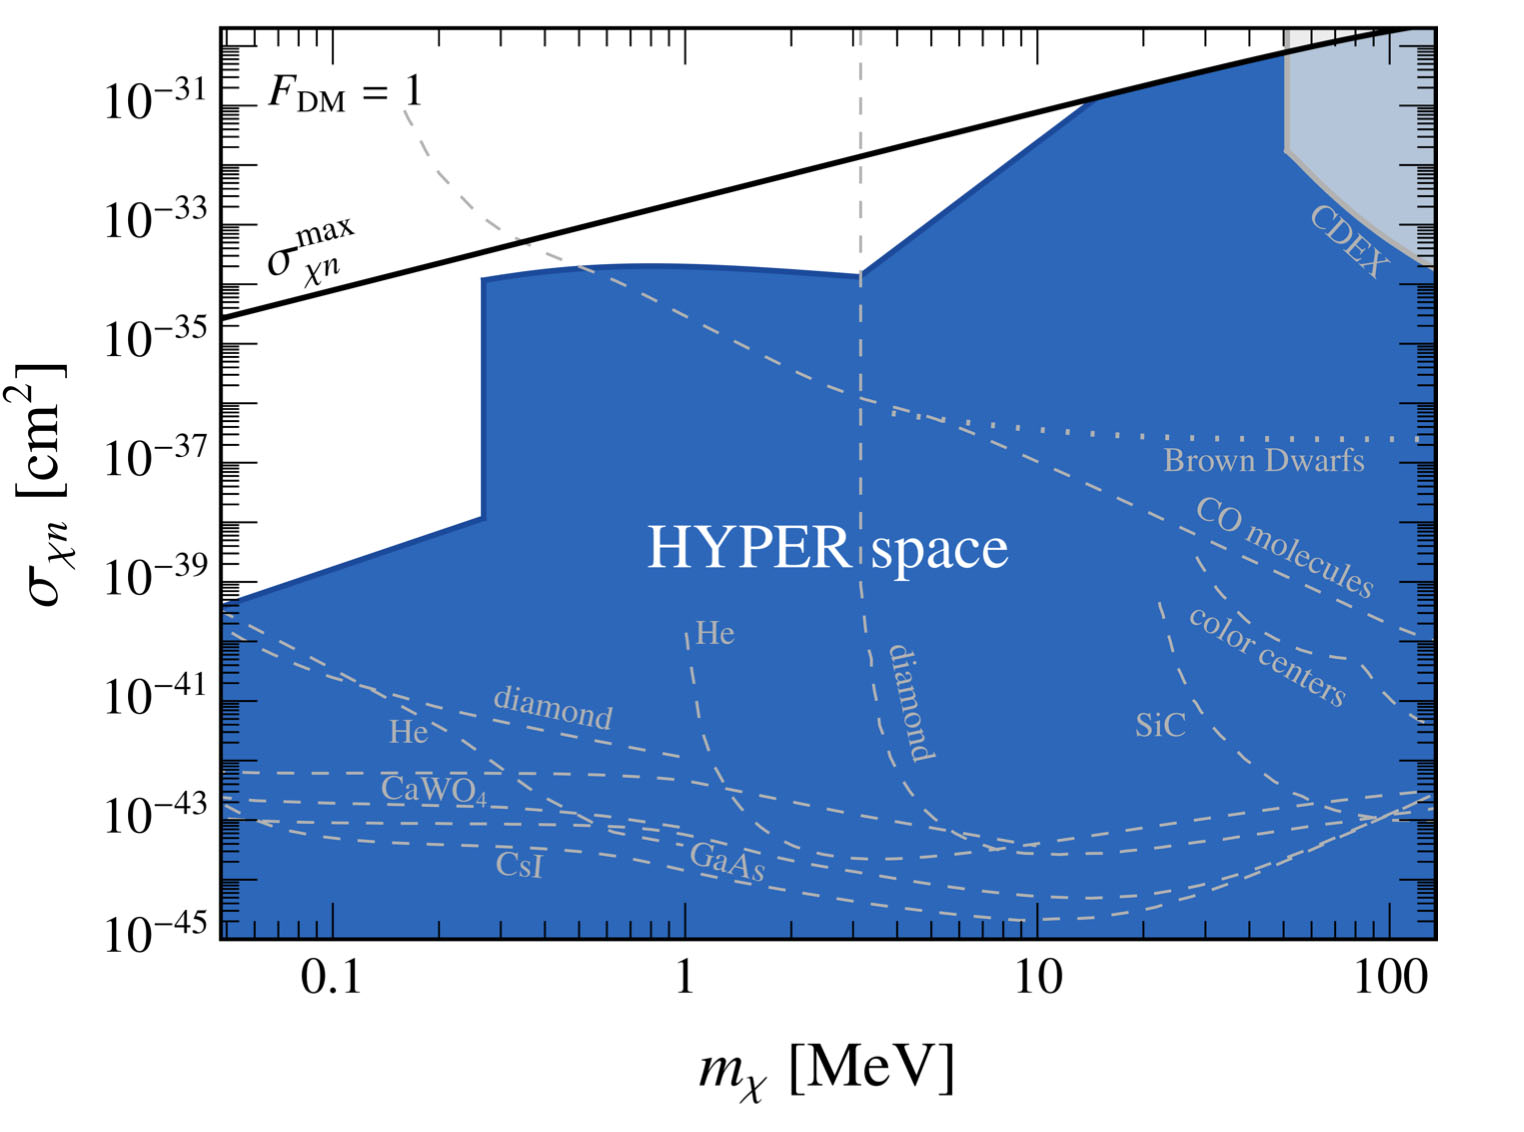 The HYPER model covers almost the complete parameter range of planned experiments for the direct search for dark matter